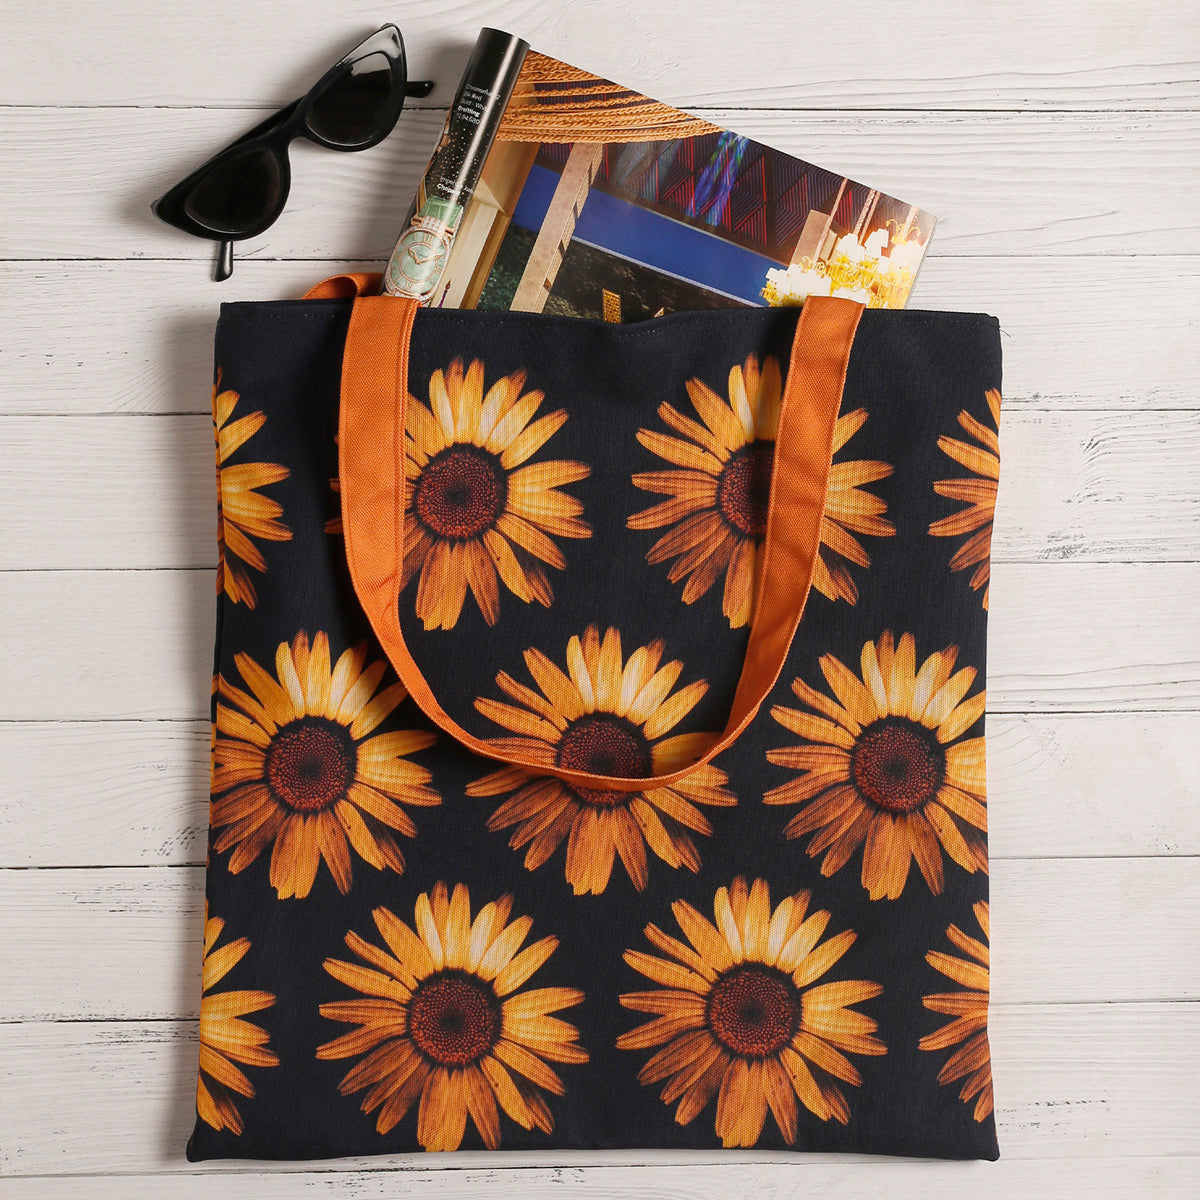 A tote bag adorned with vibrant sunflowers, adding a touch of nature's beauty to your everyday essentials.